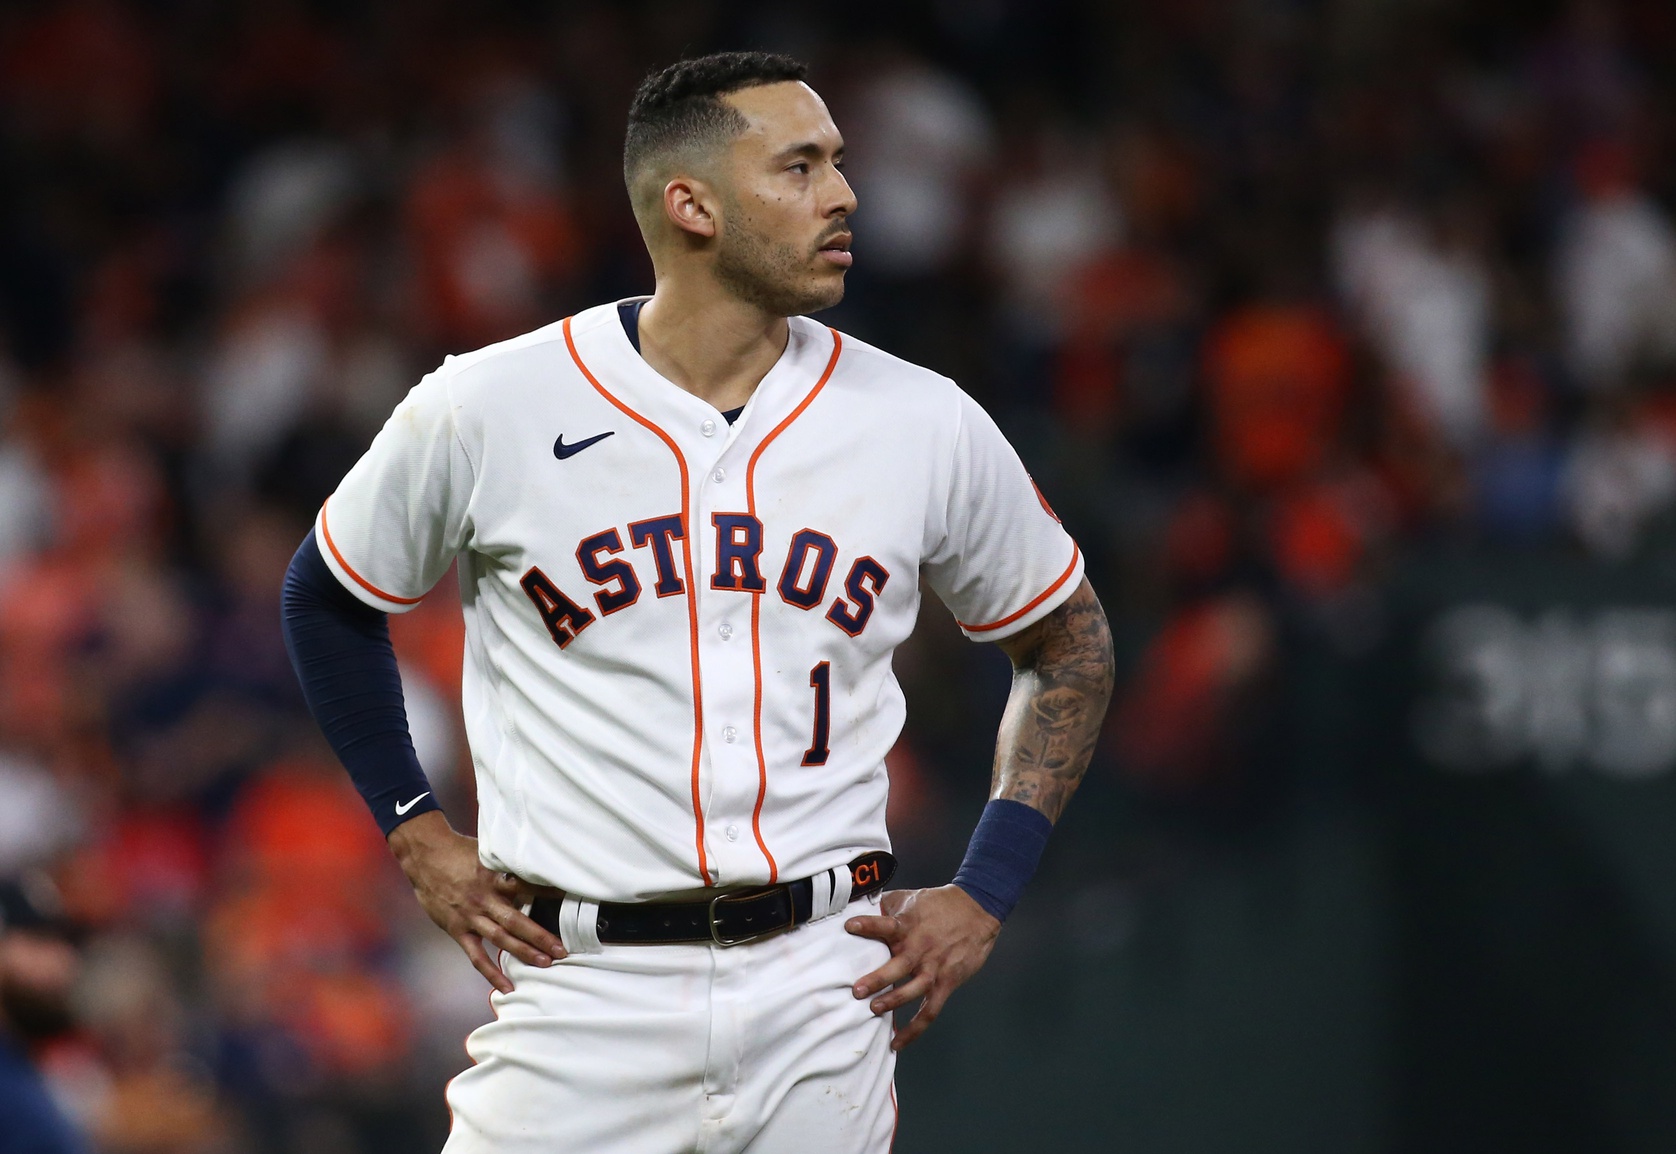 Everything to know about Mets concern over Carlos Correa's physical